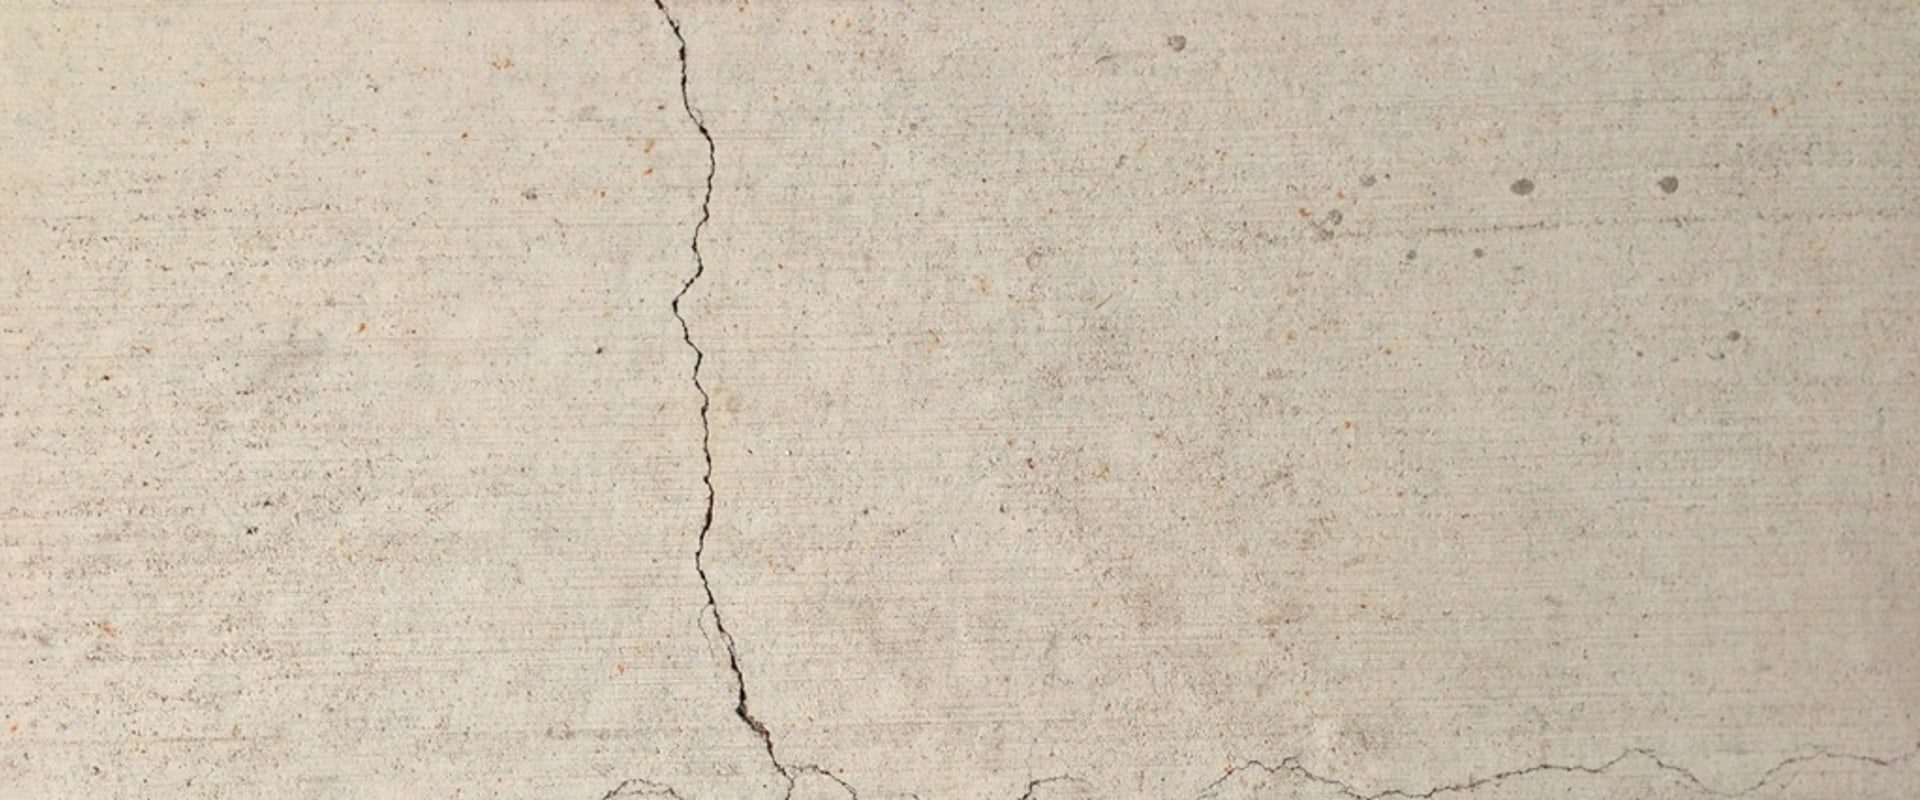 What to Know About Cracks in Concrete Floors